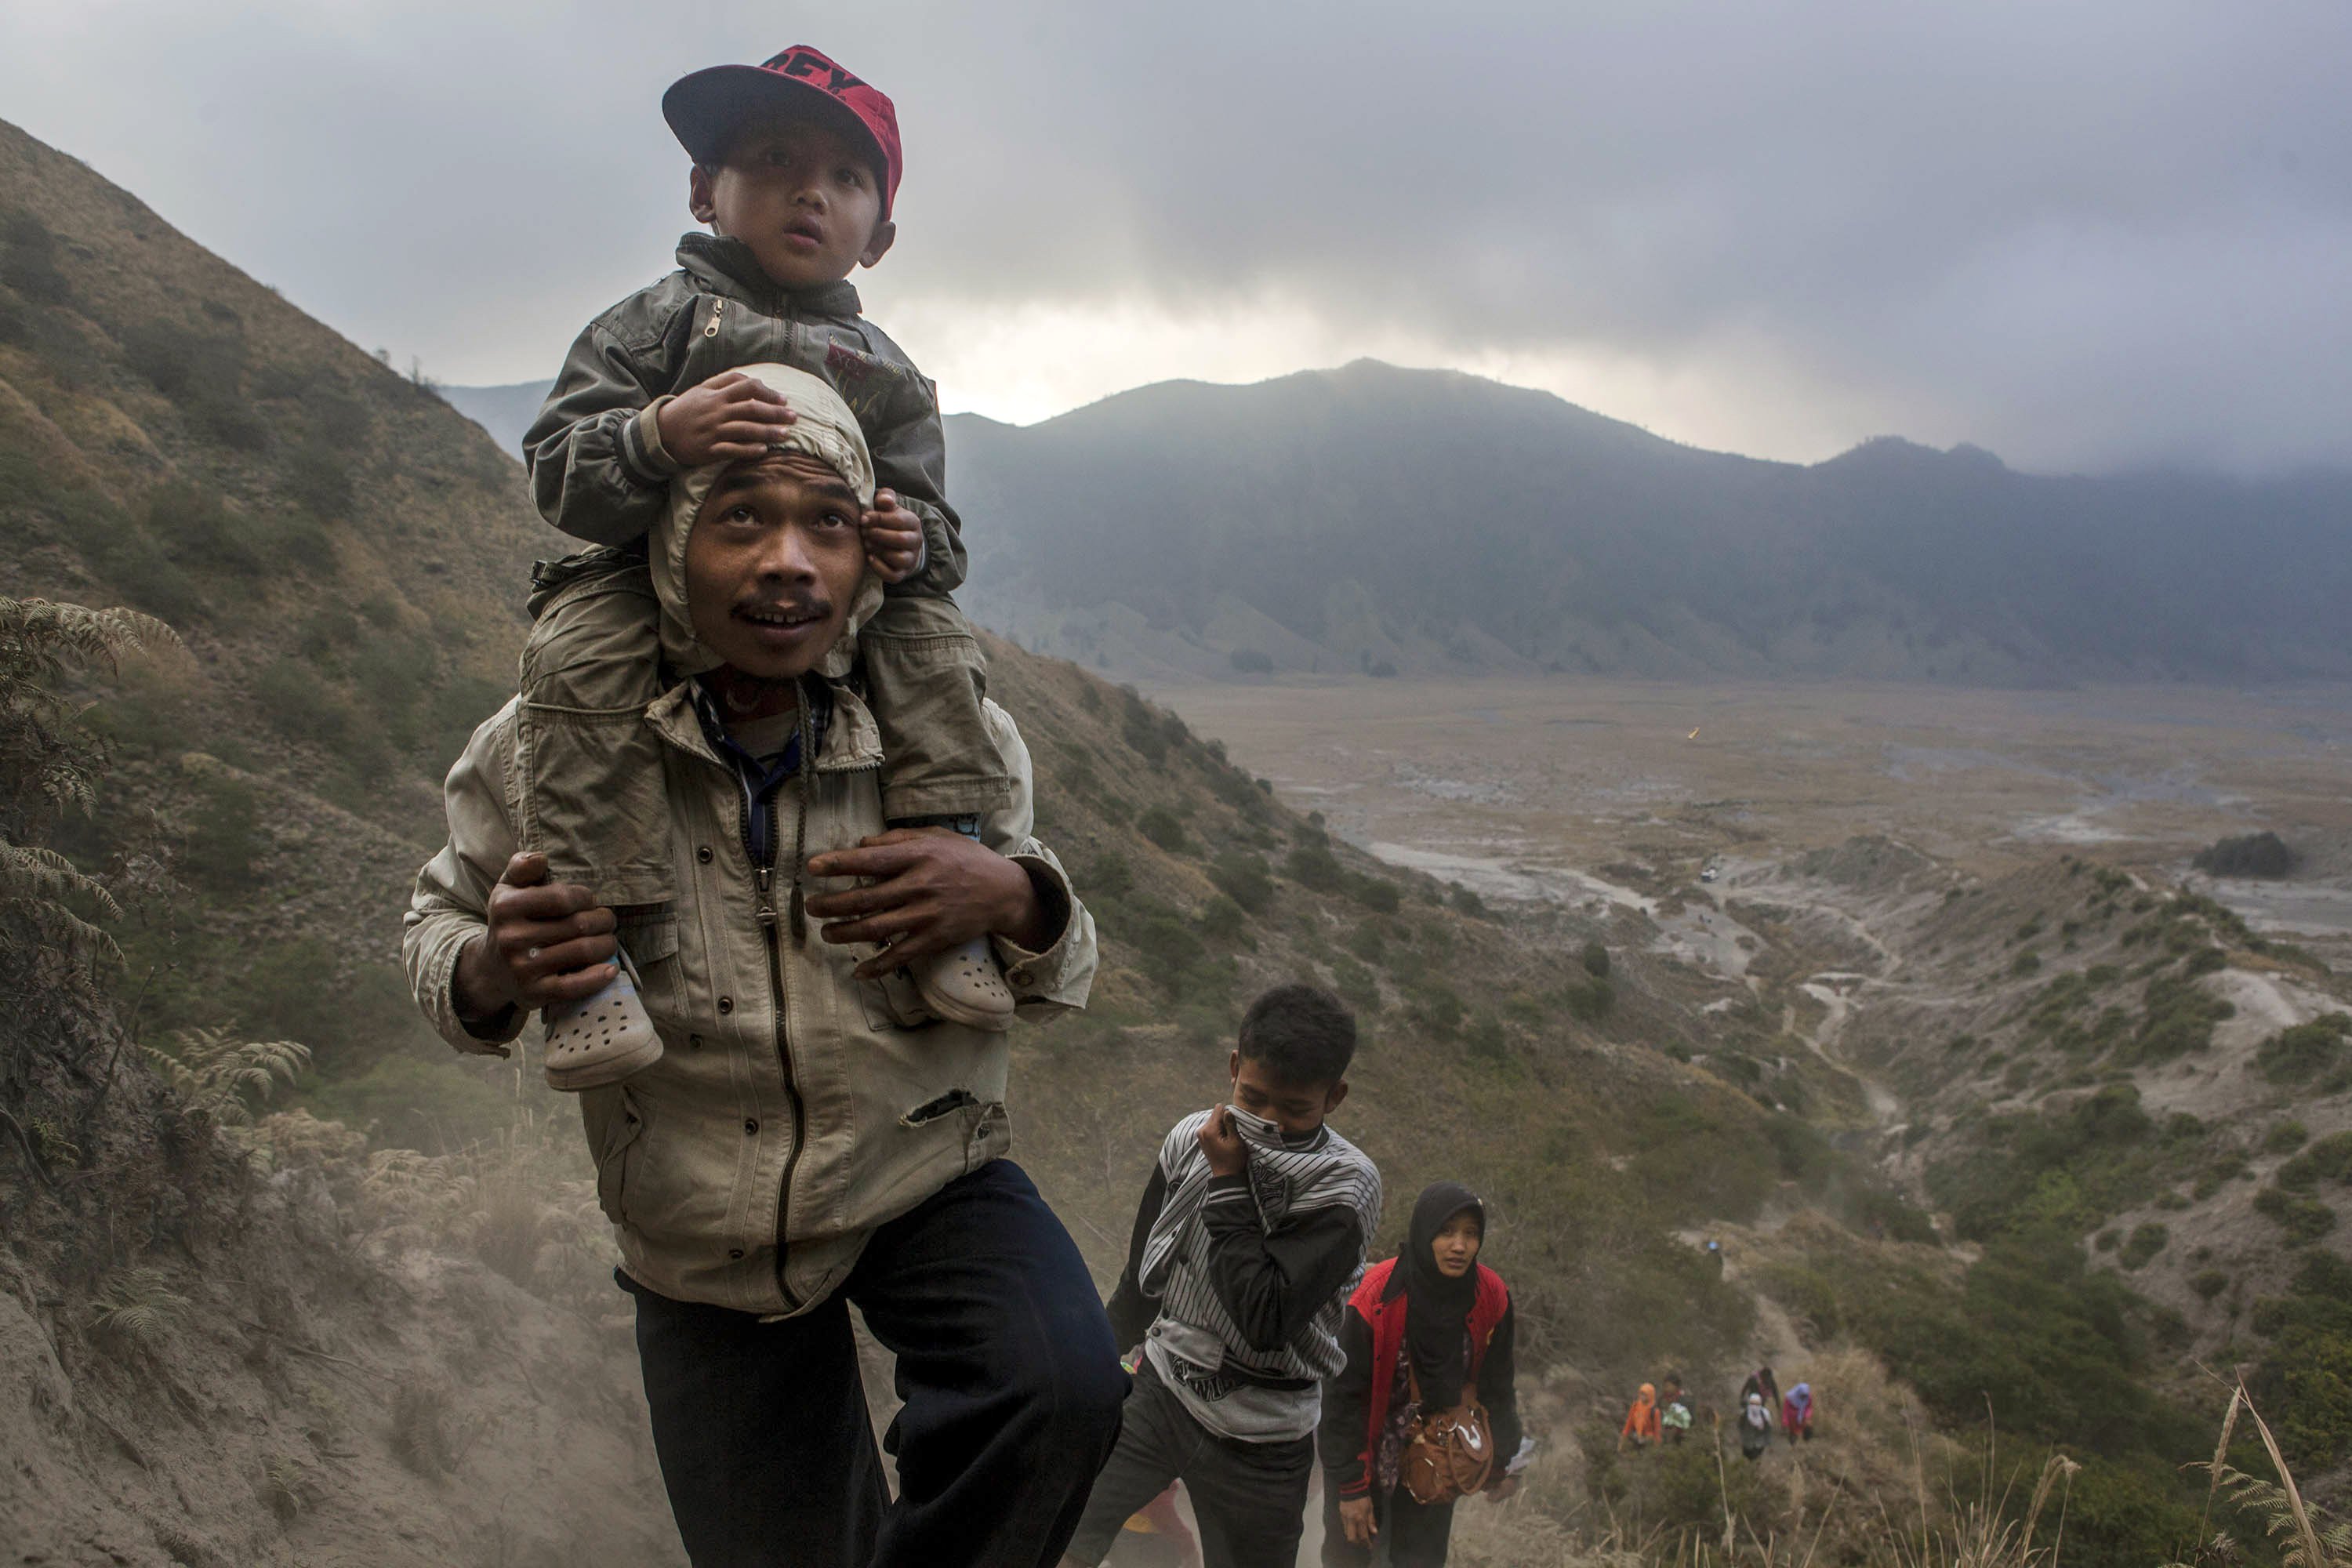 A Tenggerese worshipper carries his son as he walk climb the mountain for collect holy water during the Tenggerese Hindu Yadnya Kasada festival on August 11, 2014 in Probolinggo, Java, Indonesia.